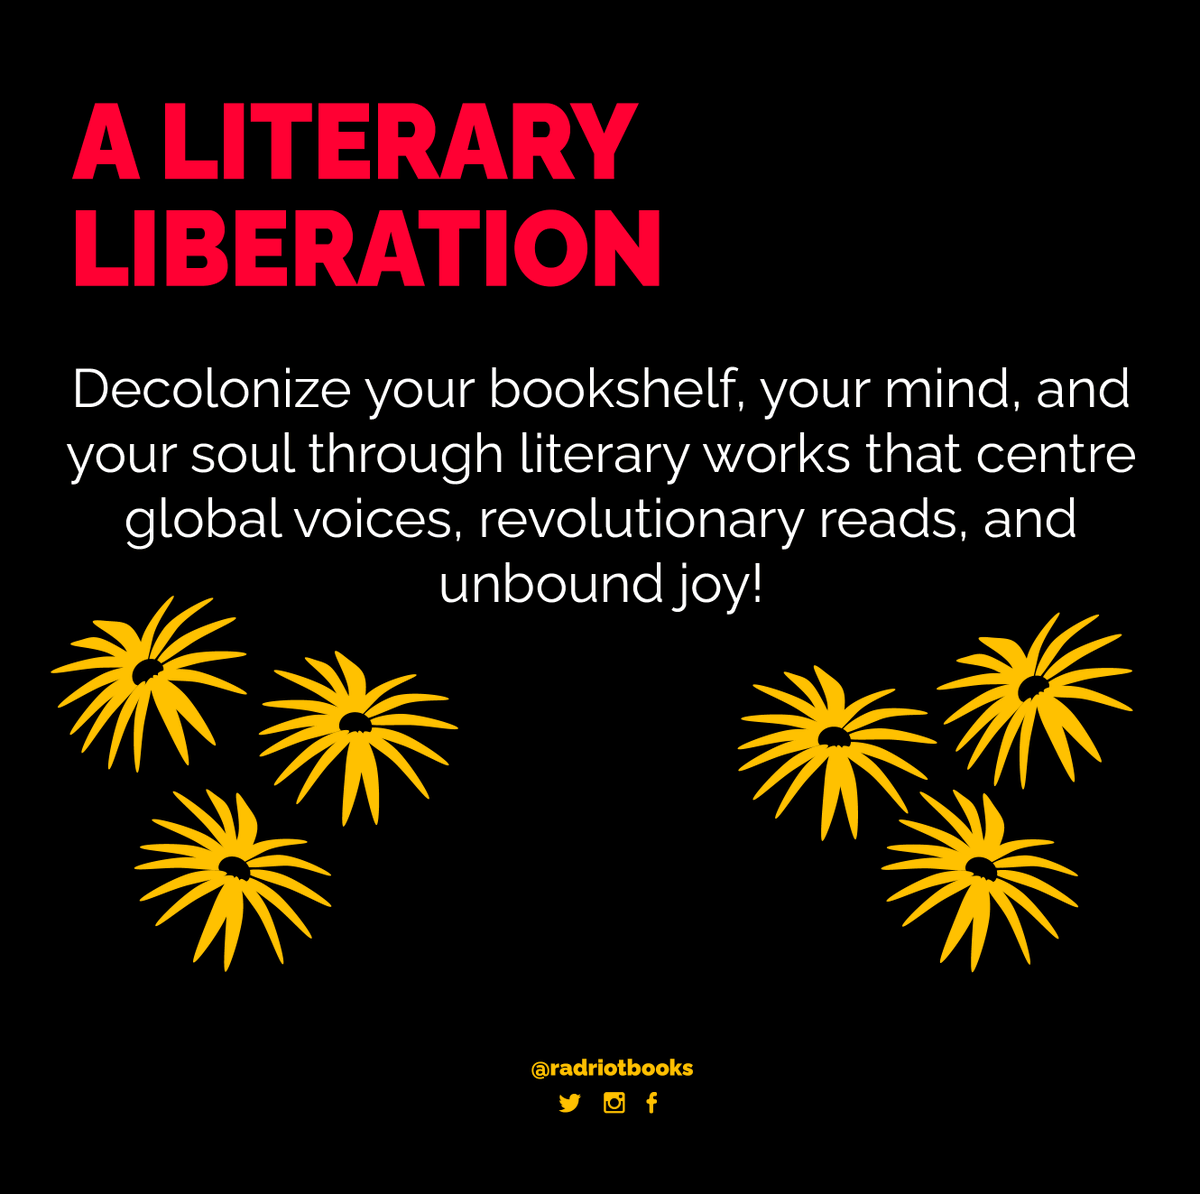 #RadRiotBooks is a literary liberation. Let's use the power of reading to decolonize our bookshelf, our mind and our soul through literary works that center #globalvoices, #revolutionaryreads and #unboundjoy!
.
#readingcommunity #readtogether #decolonizeyourbookshelf